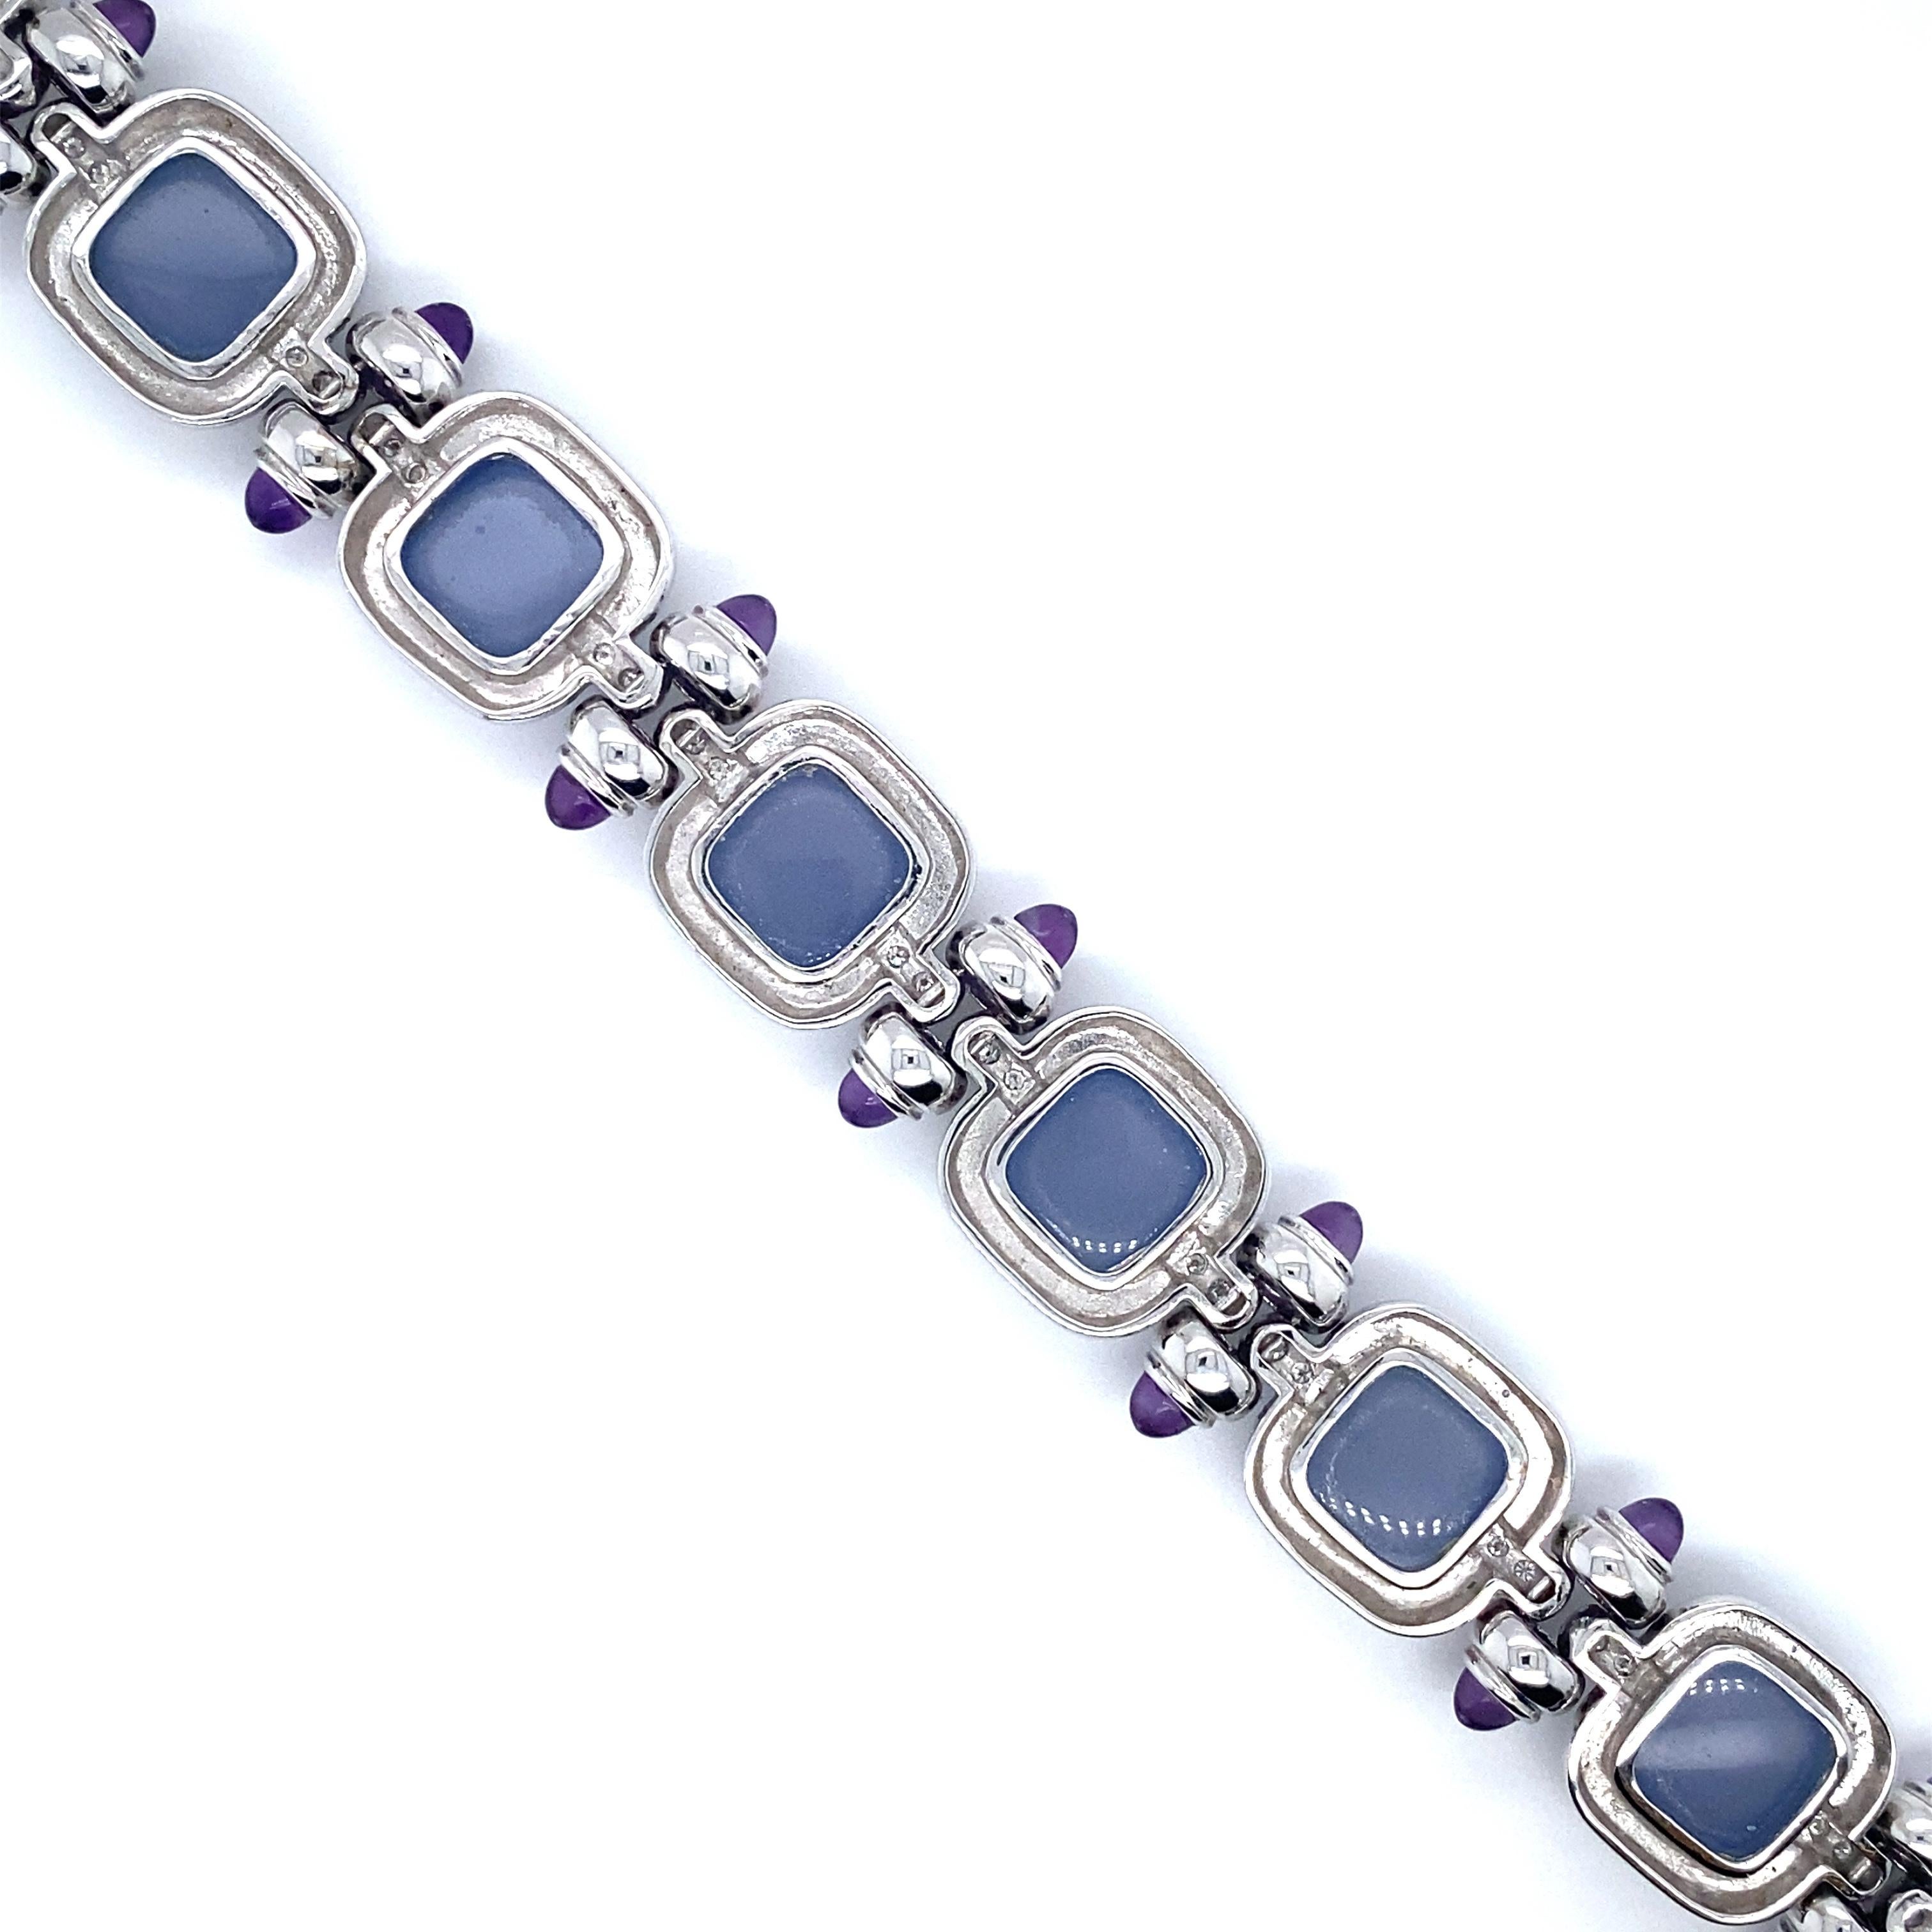 Item Details: This spectacular bracelet crafted in 14k white gold features purple chalcedony, amethyst stones and diamond accents.

Circa: 2000s
Metal Type: 14 Karat White Gold
Weight: 39.4 grams
Size: 7.25